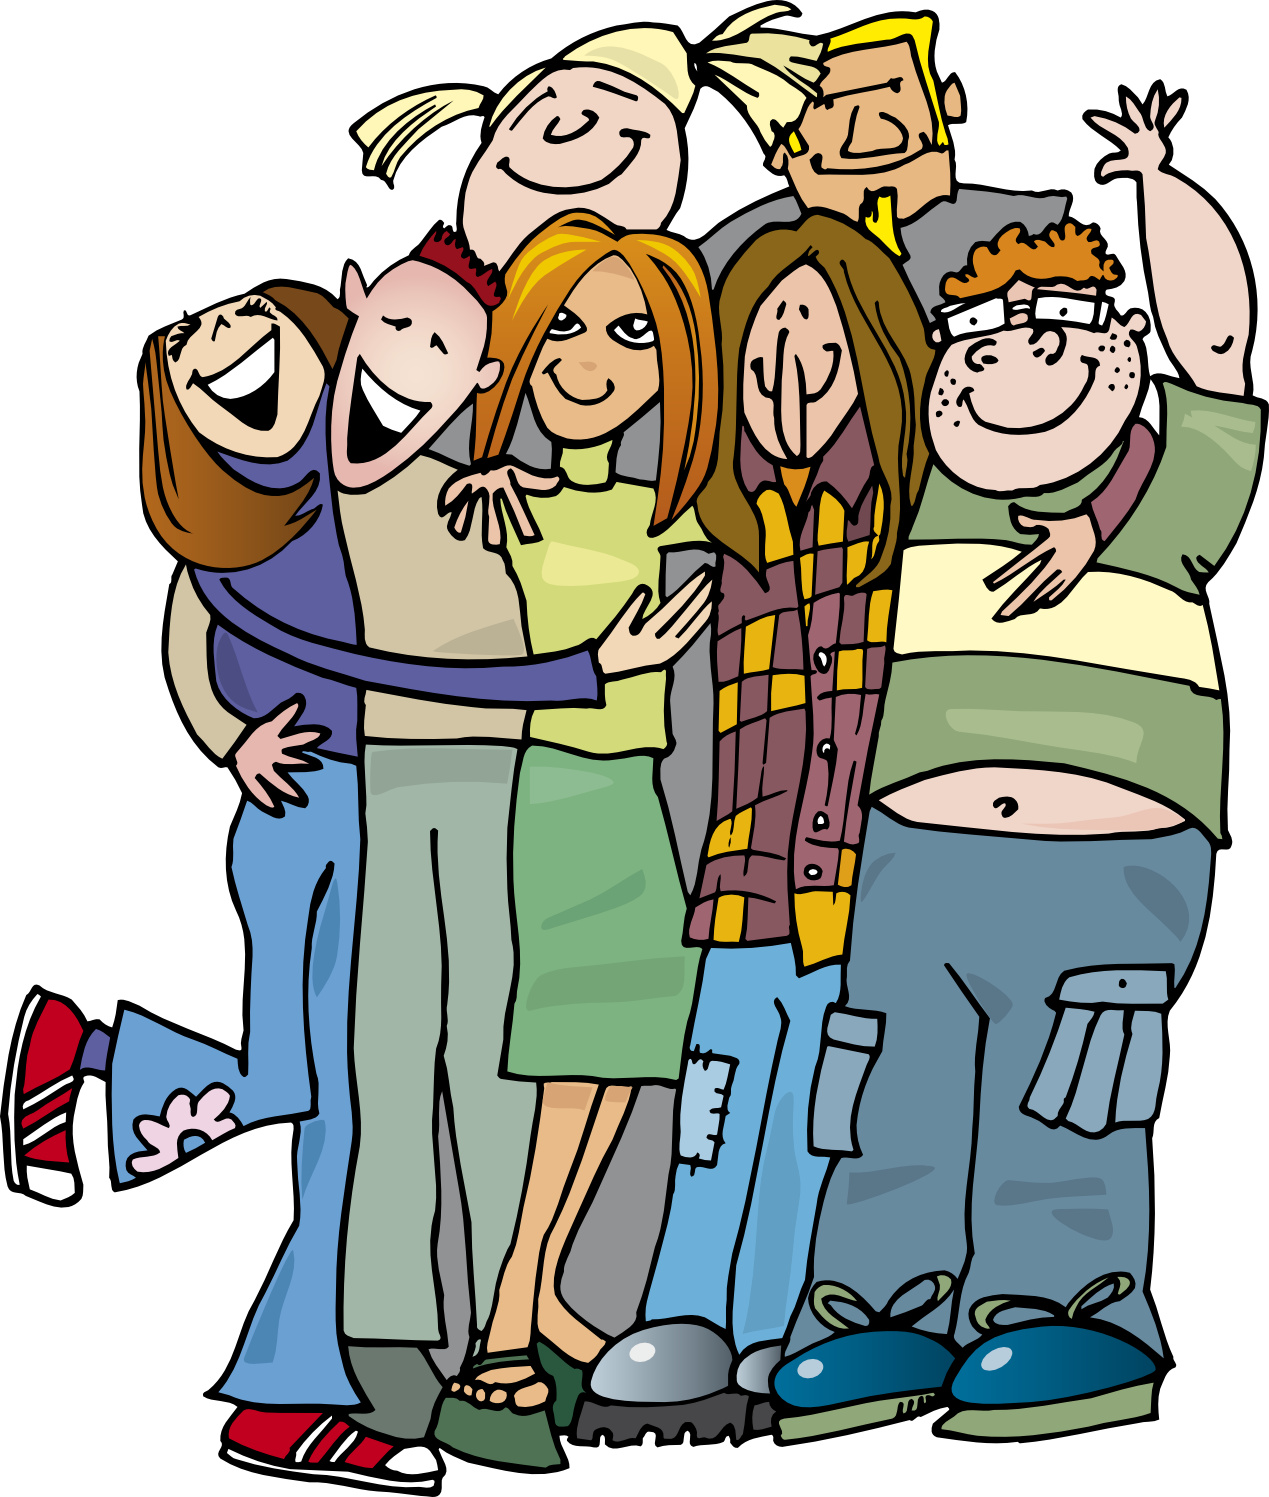 Hang out with friends clipart 10 » Clipart Station.